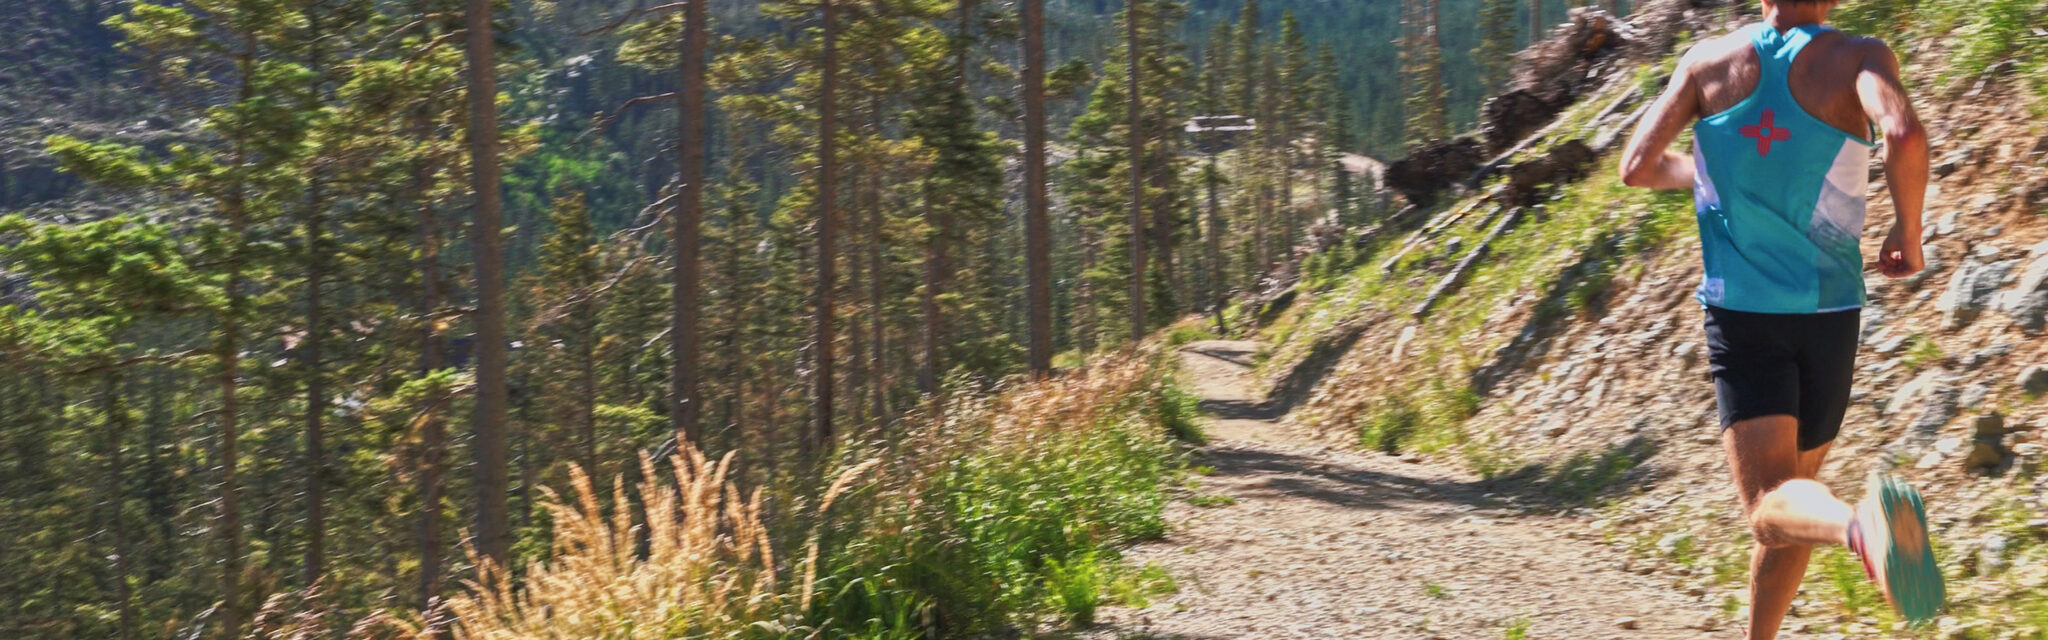 A man in a turquoise tank top runs down an open trail in the mountains.